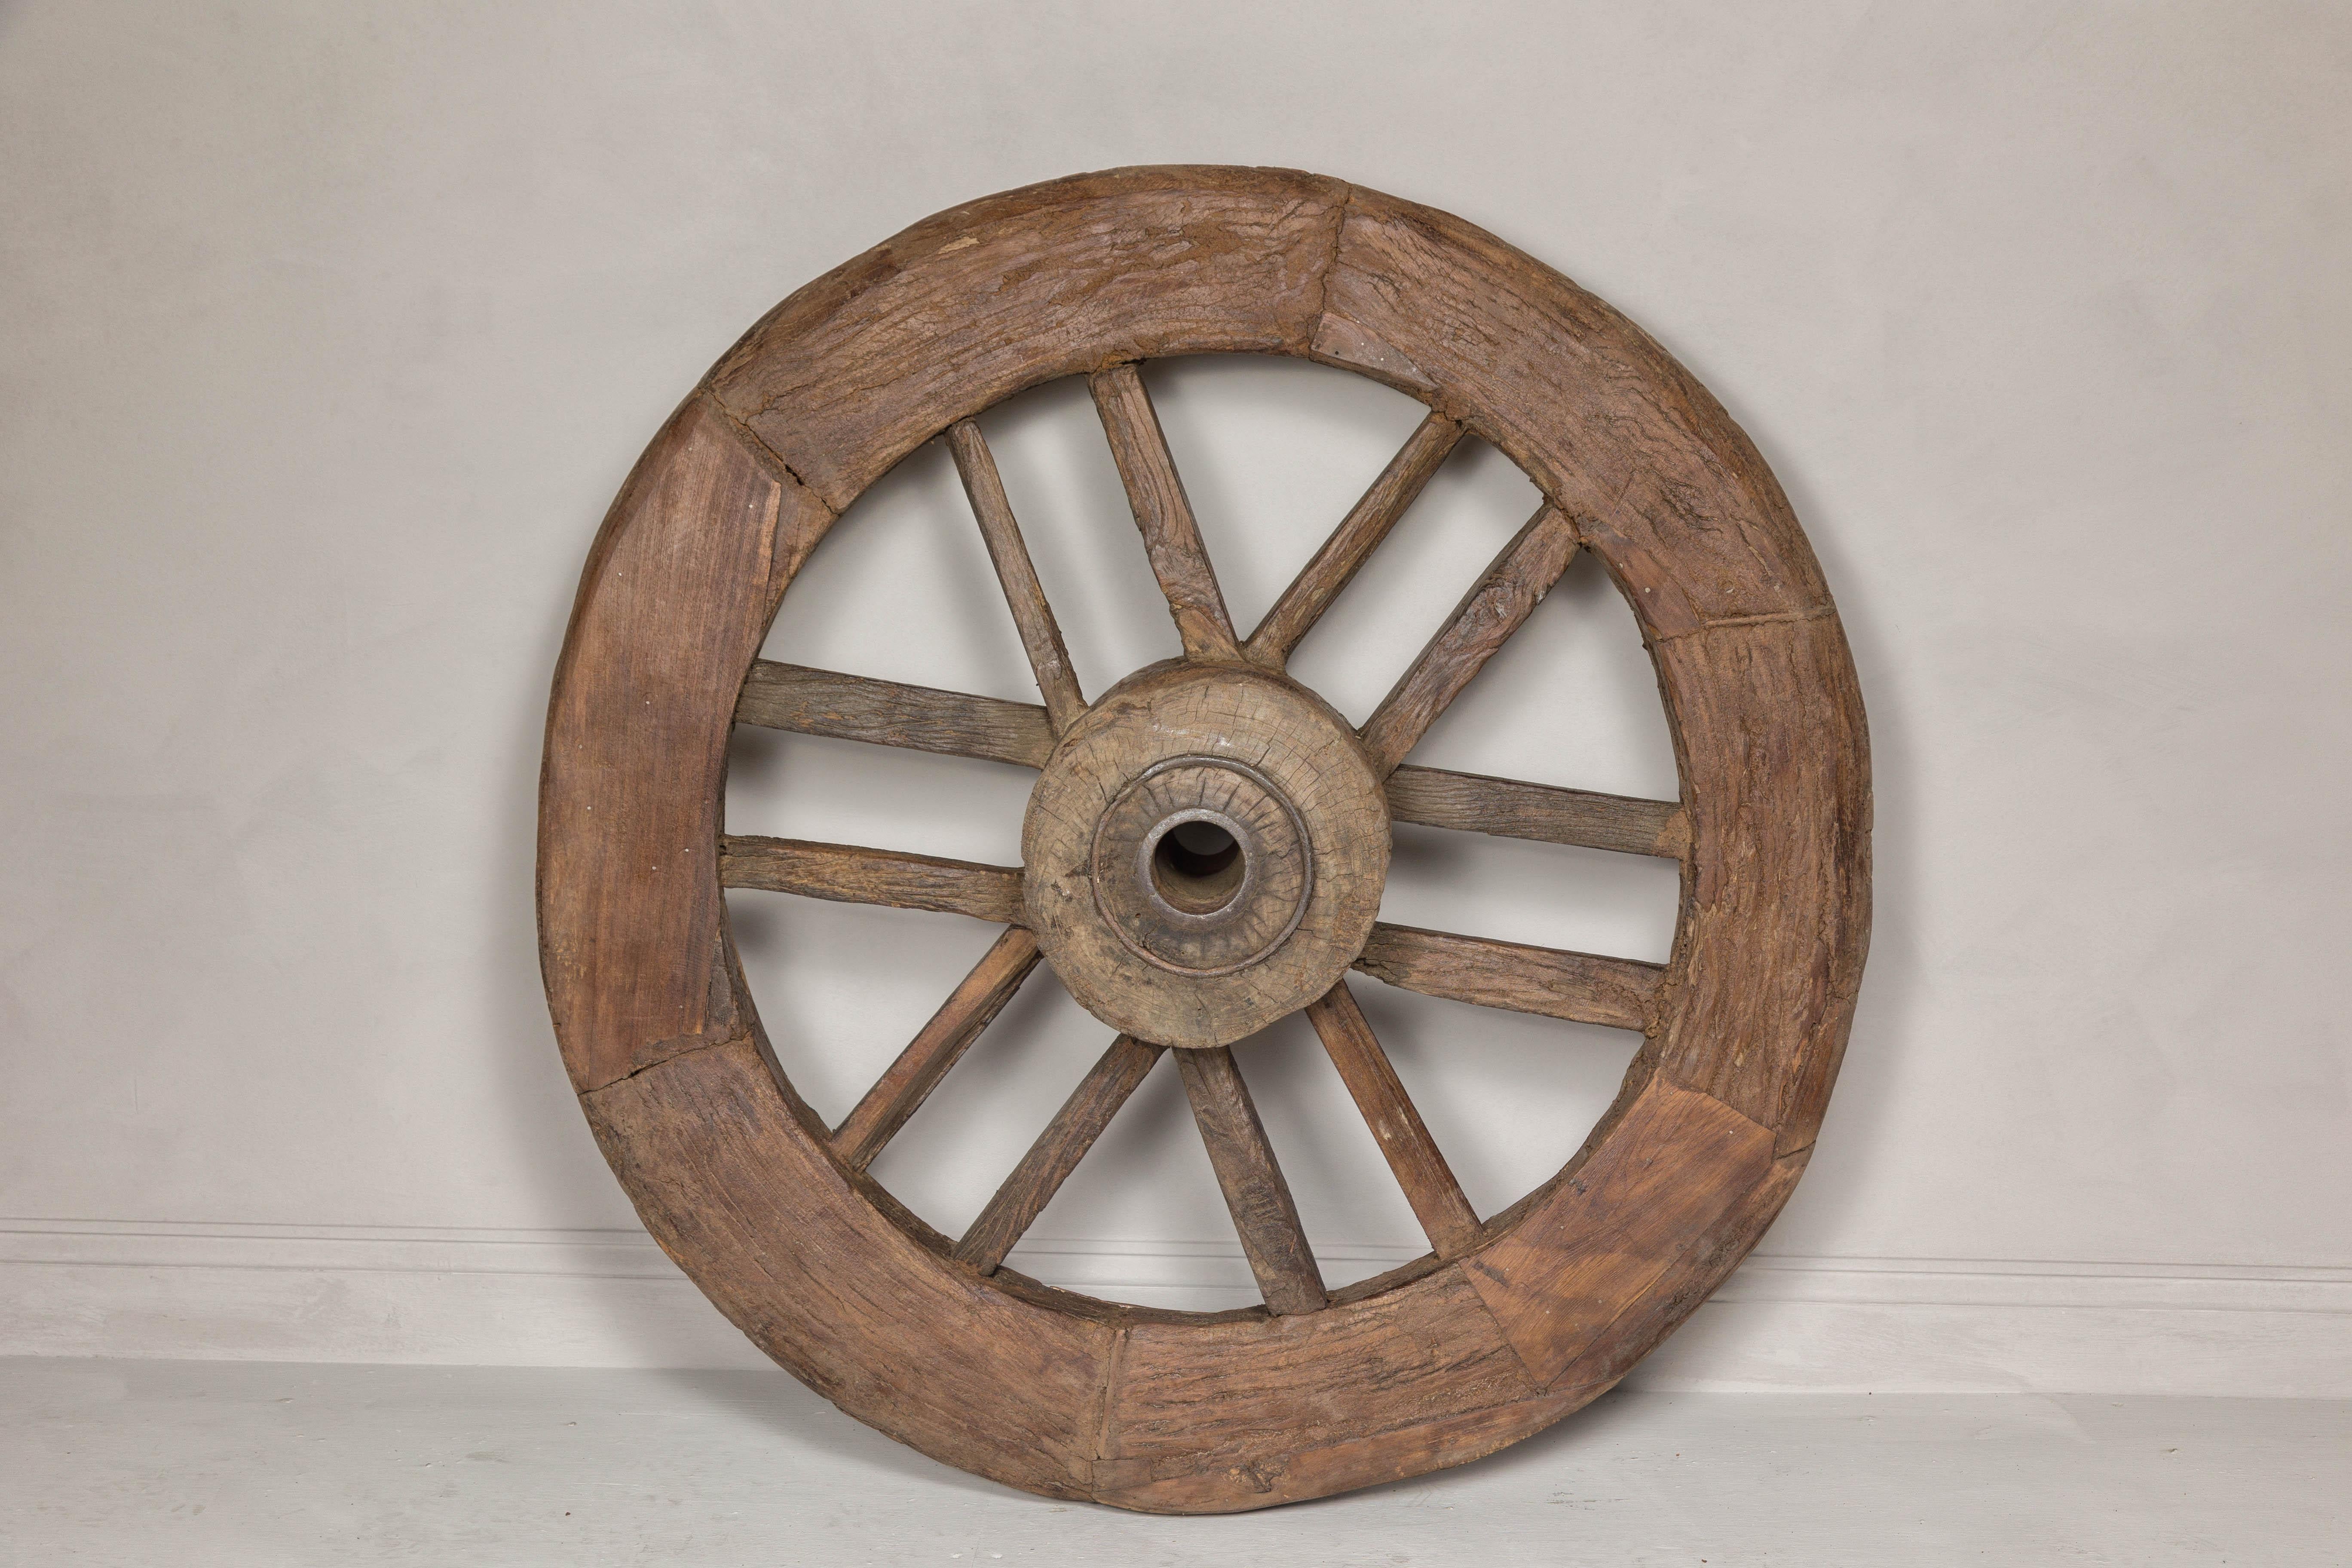 An antique Indian wood and metal cart wheel with great rustic character. This antique Indian cart wheel, crafted from wood and metal, showcases an exceptional rustic character that speaks volumes of its historical and cultural past. The wheel is